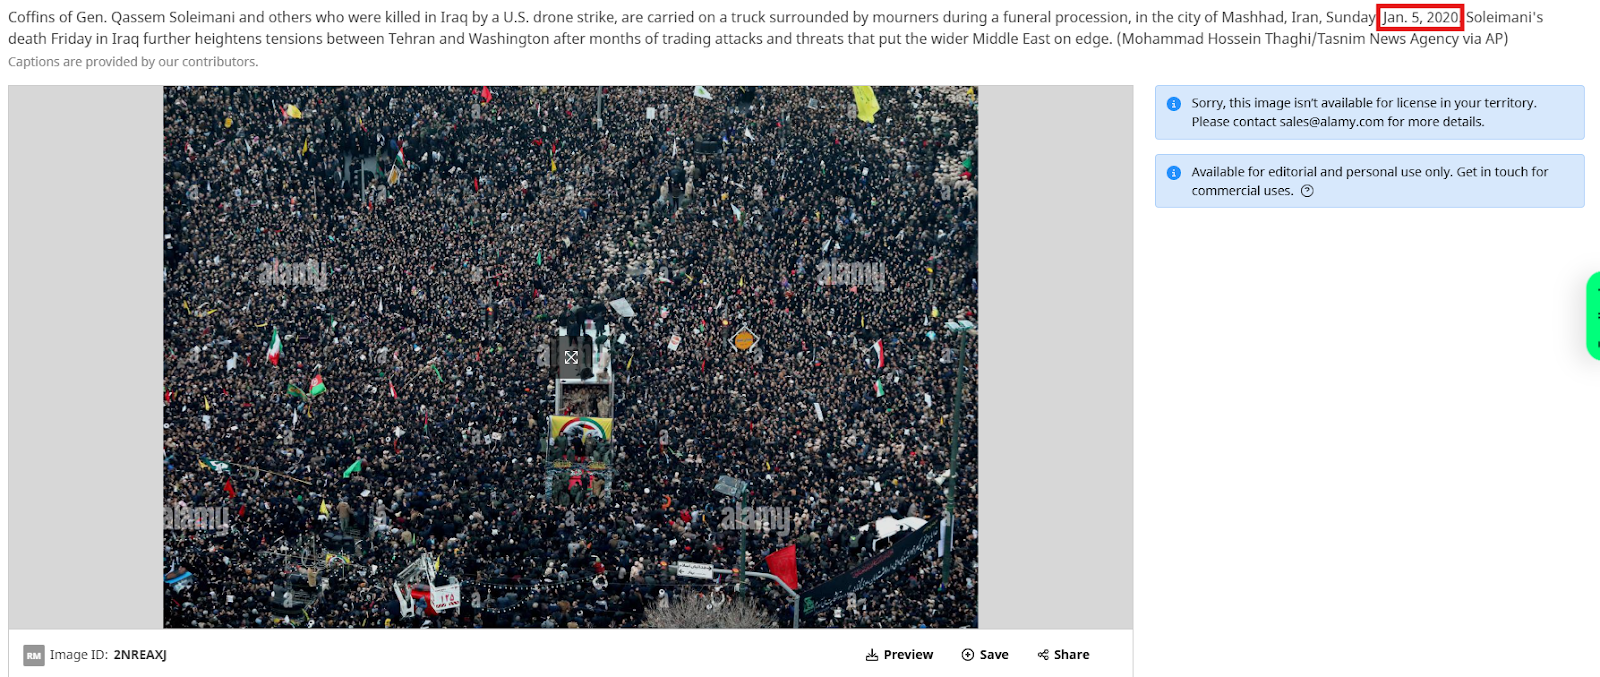 A large crowd of people

Description automatically generated